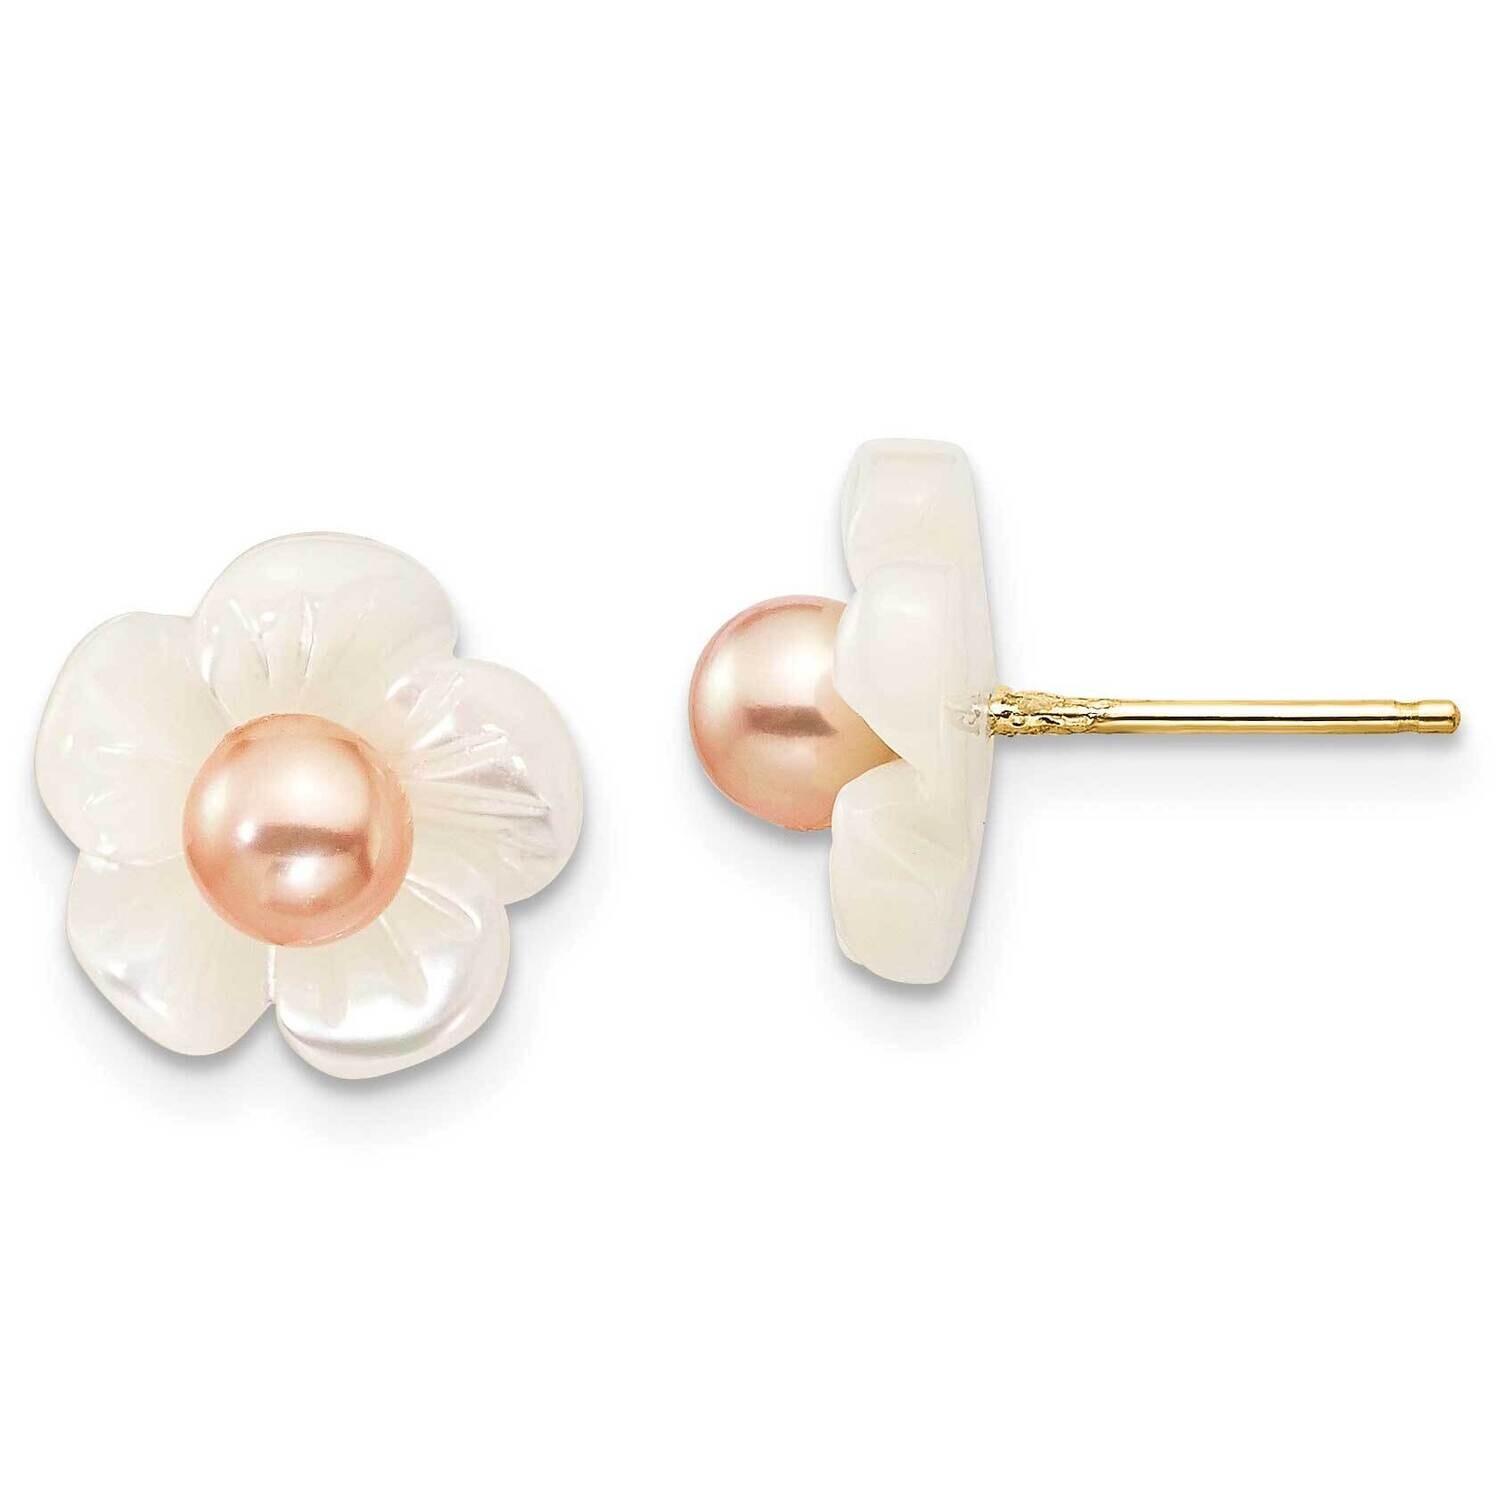 3-4mm Pink Fw Cultured Pearl 10mm Mop Flower Post Earrings 10k Gold 10XF592EP